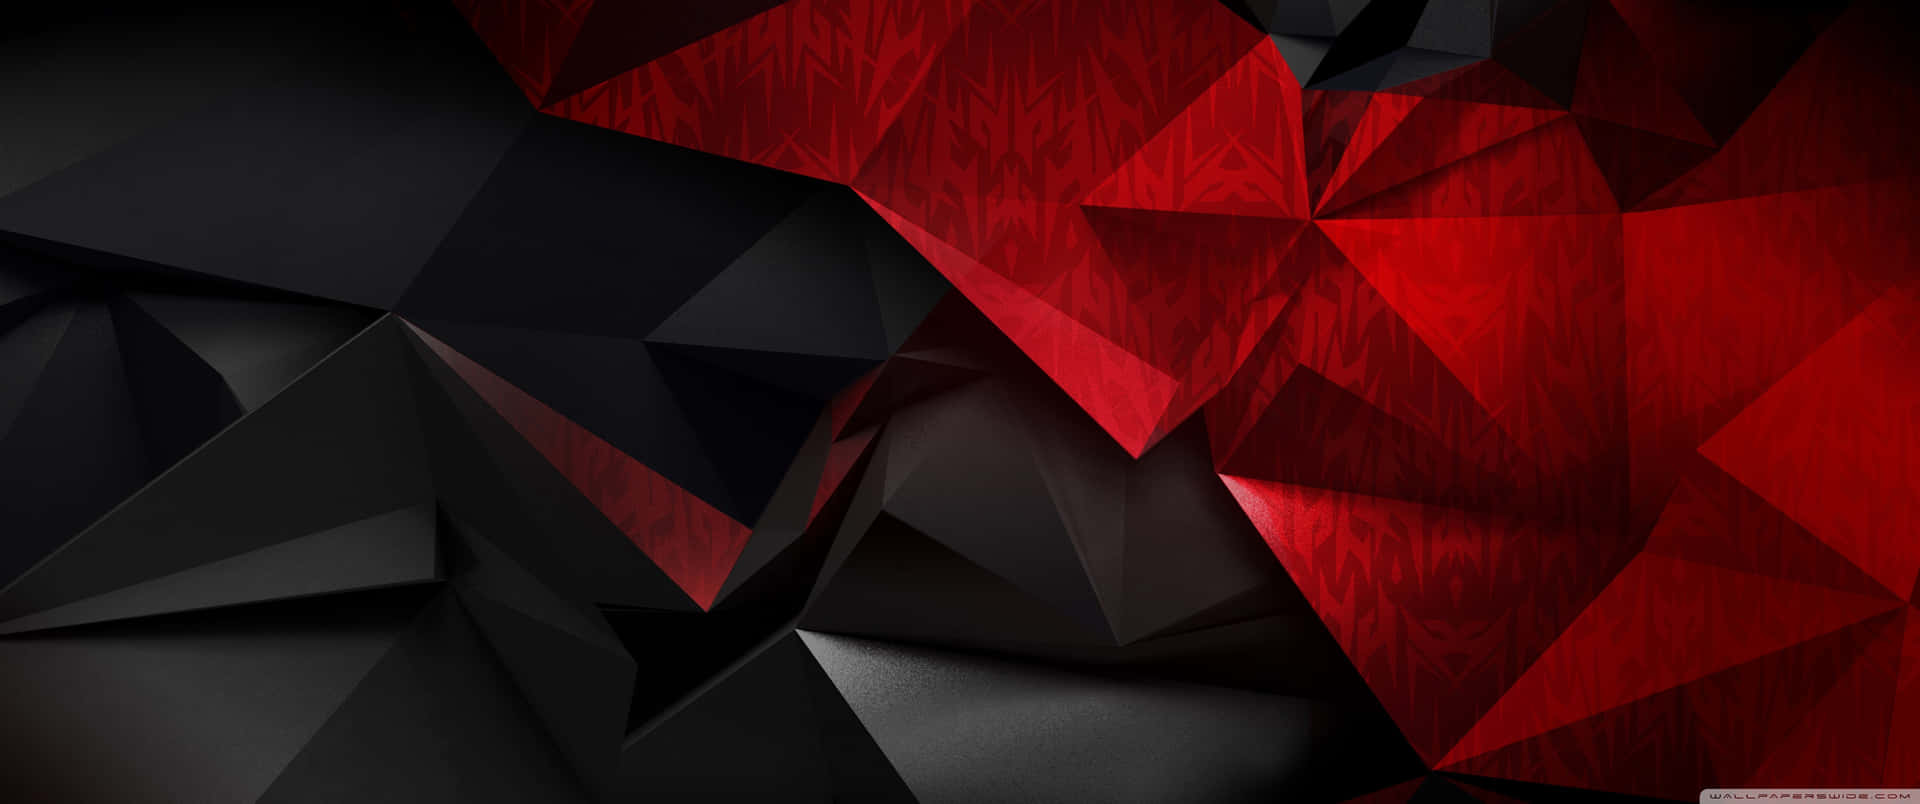 Bold Contrasts of Black and White With Red Highlights Wallpaper